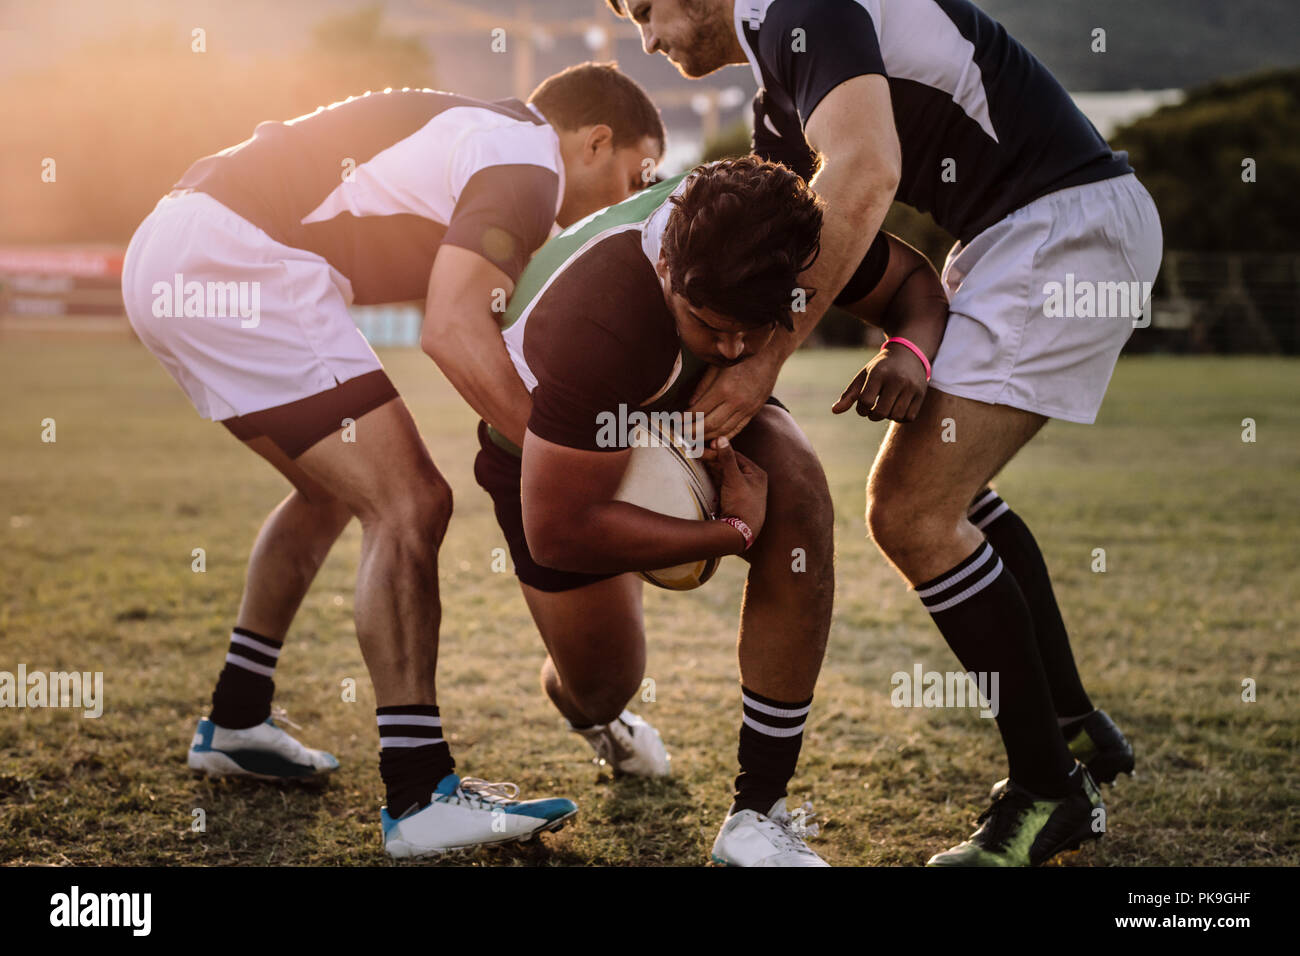 Professional rugby player is blocked by the opposite team player on ground. Rugby players striving to get to the ball during the match. Stock Photo